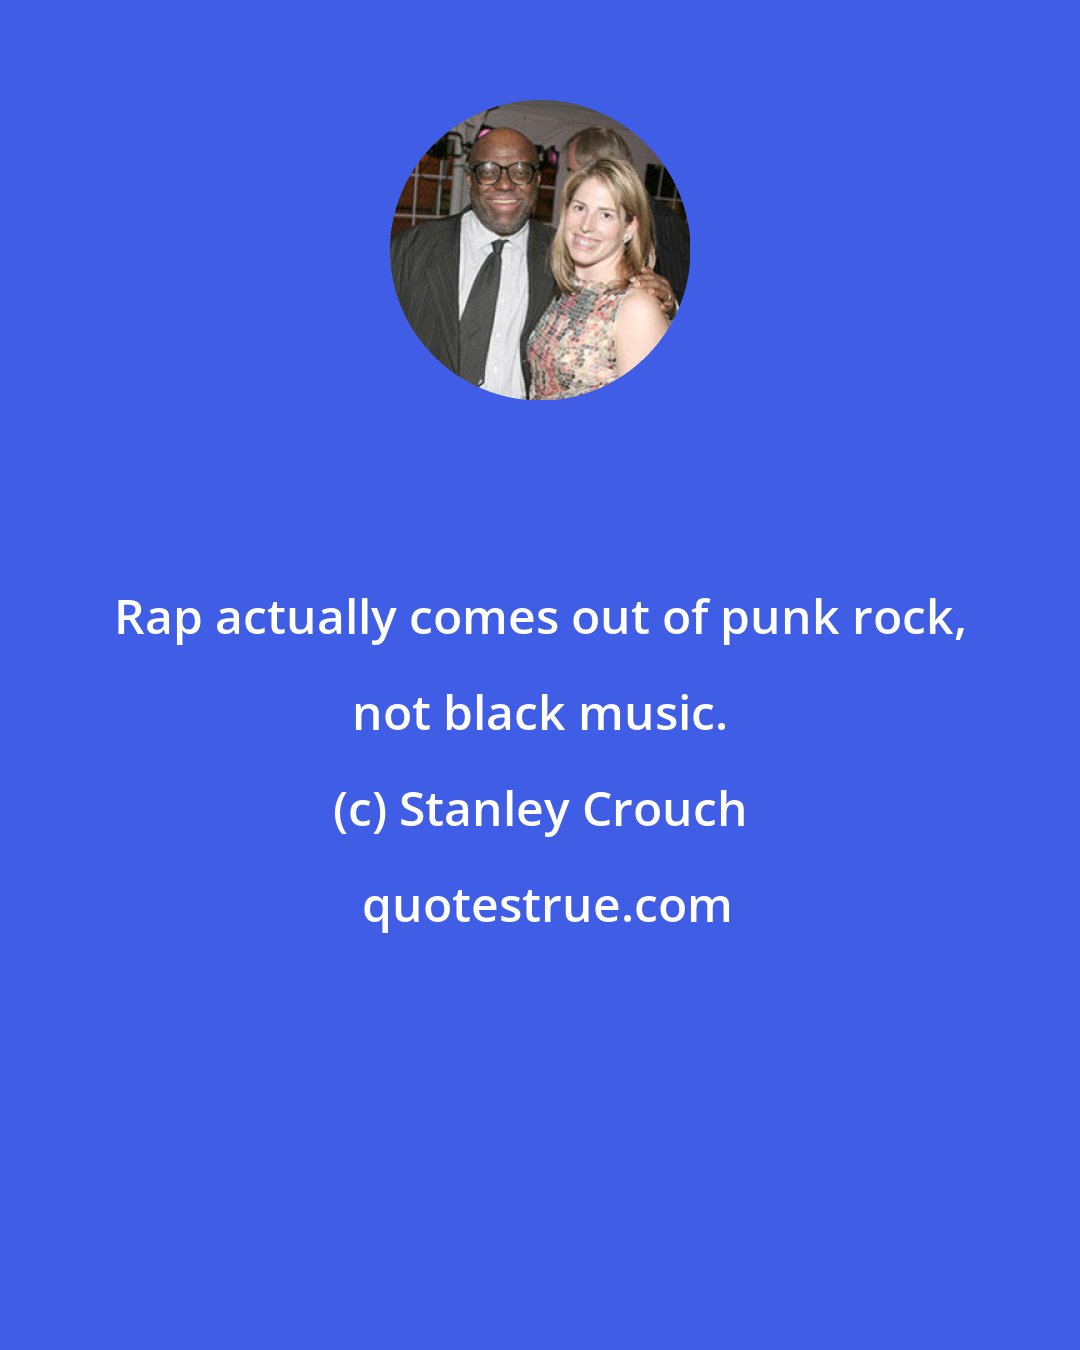 Stanley Crouch: Rap actually comes out of punk rock, not black music.